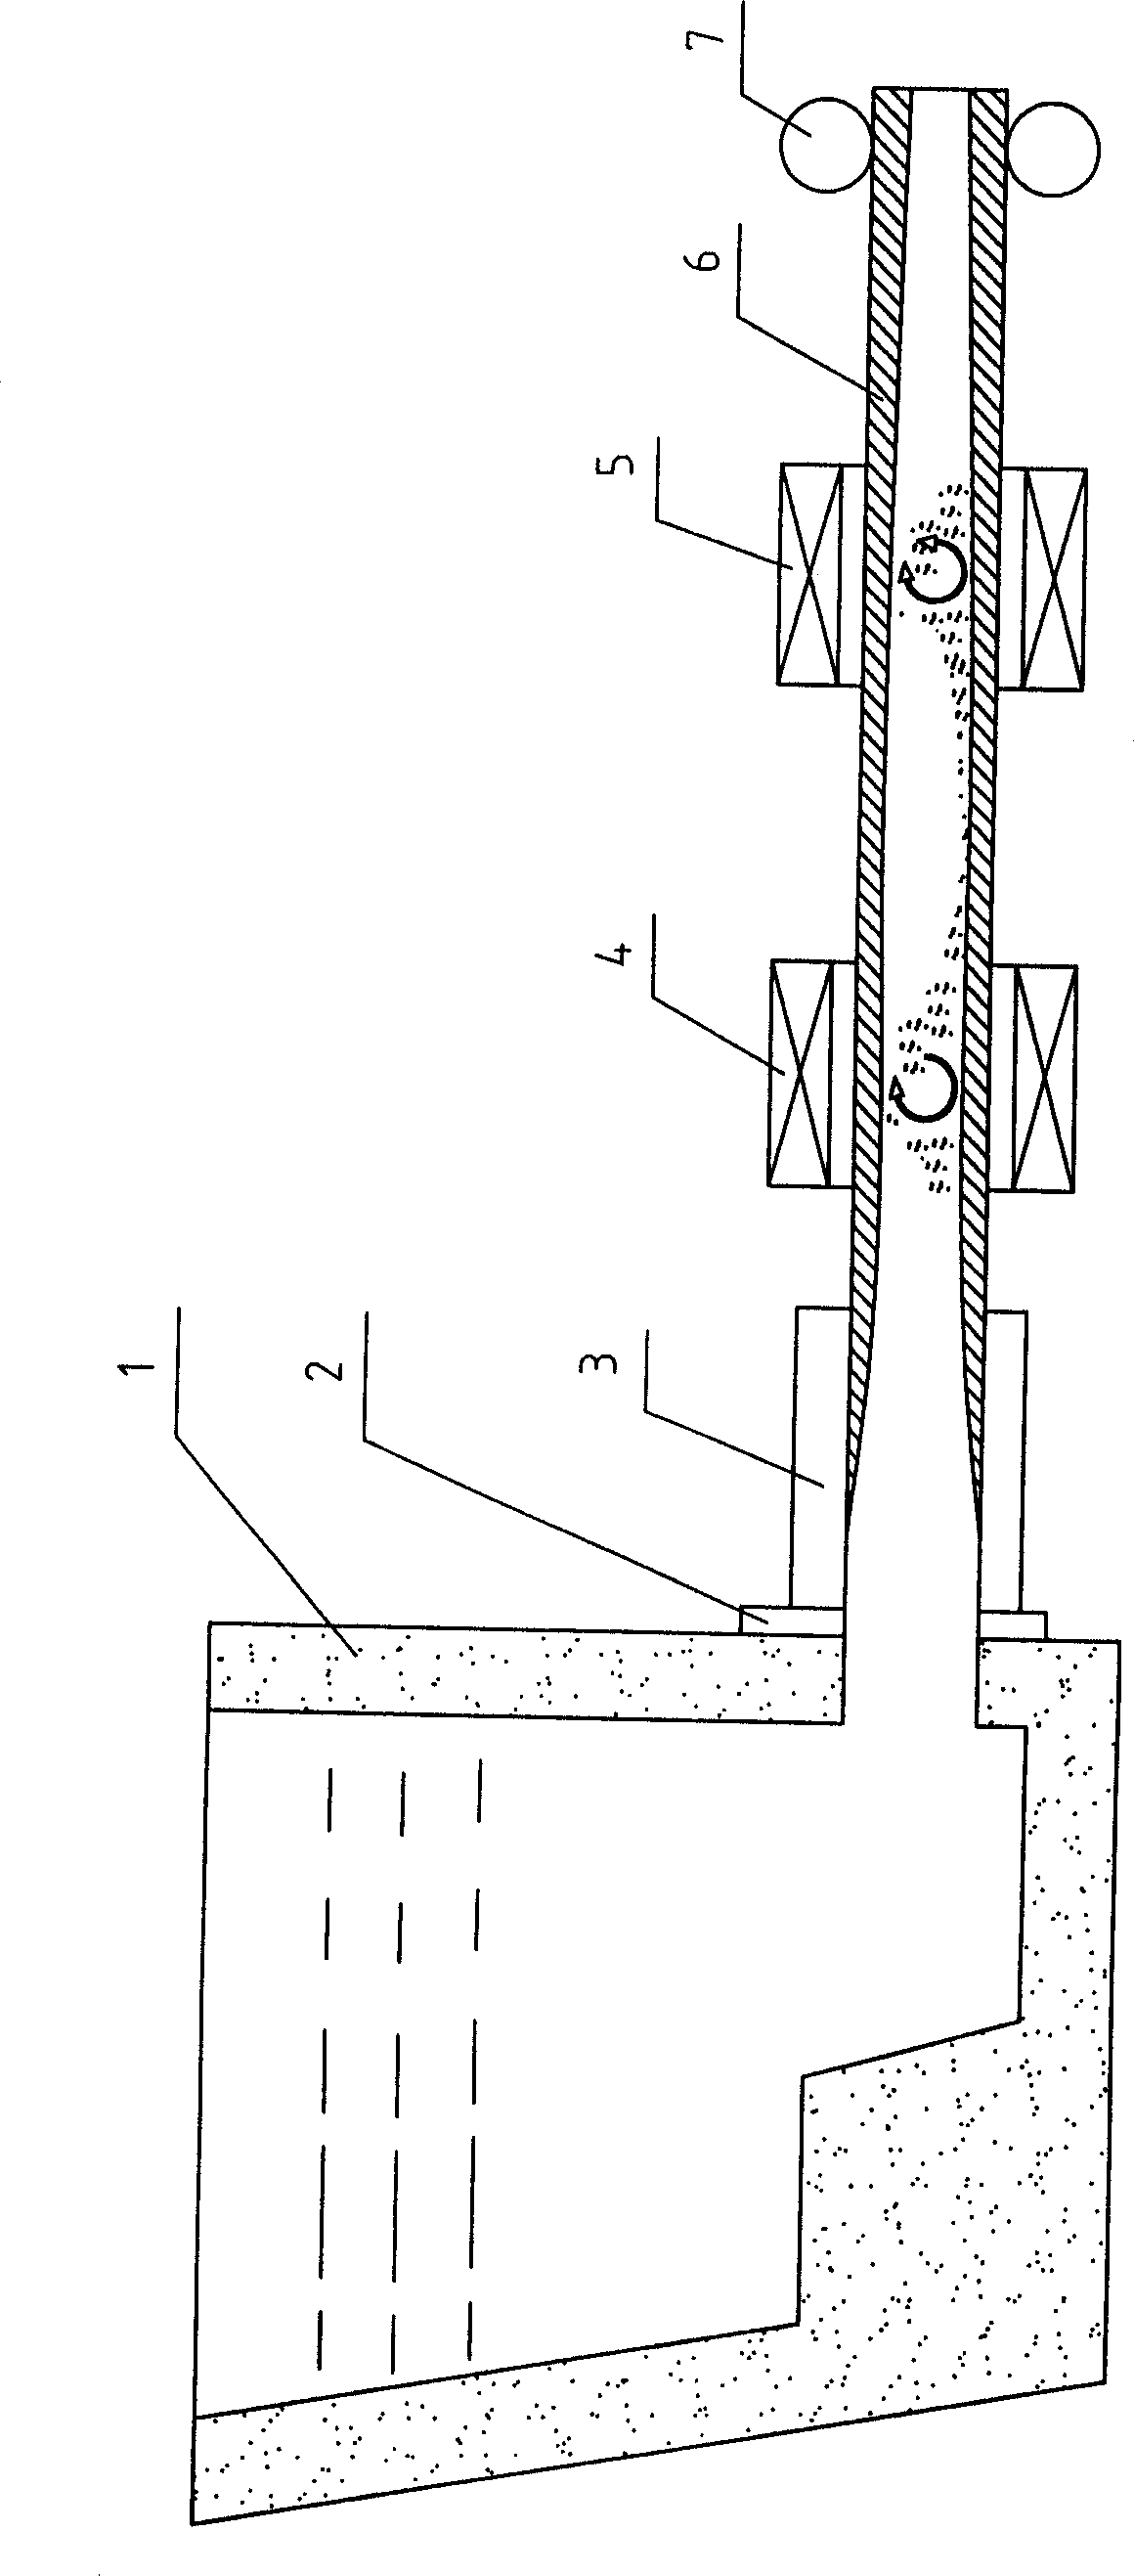 Horizontal continuous-casting electromagnetic agitating technology